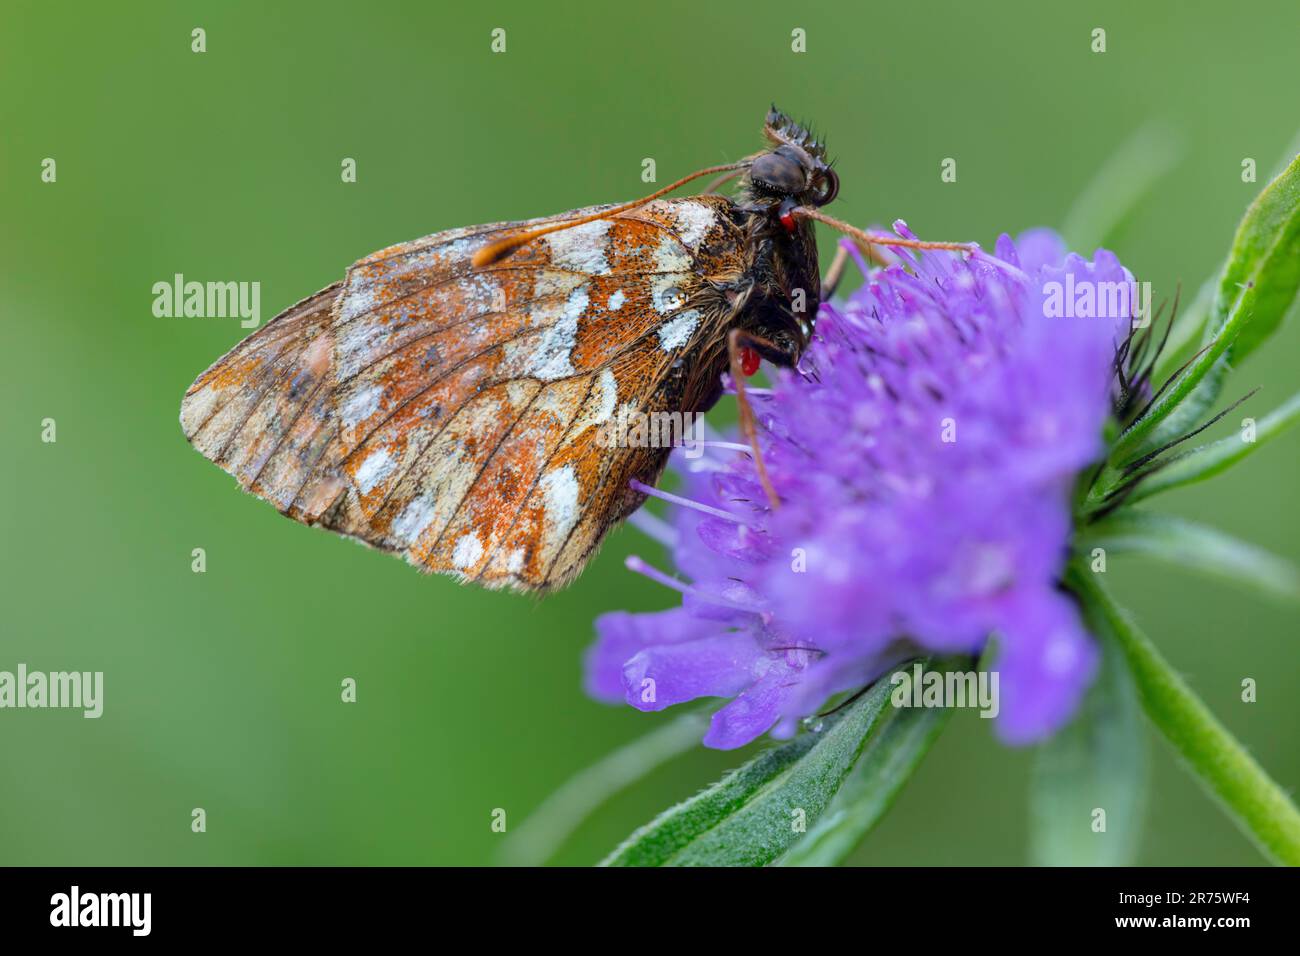 shepherd's fritillary, Boloria pales on scabiosa, close-up, lateral view Stock Photo